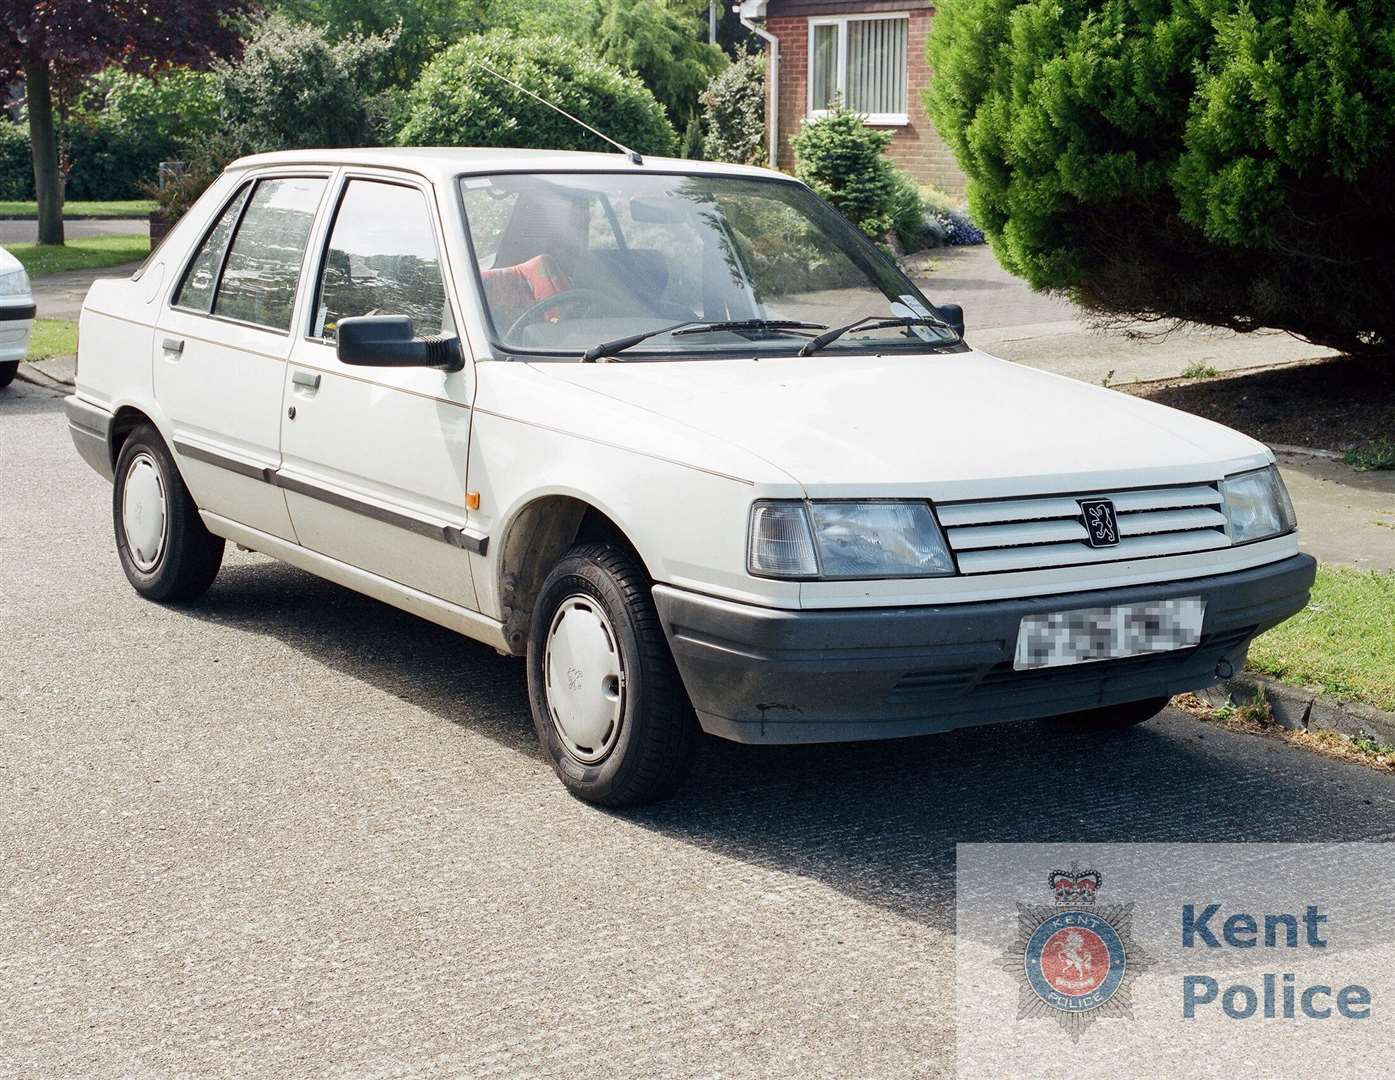 Debbie Griggs' car – a white Peugeot 309 – was found abandoned little more than a mile from the family home